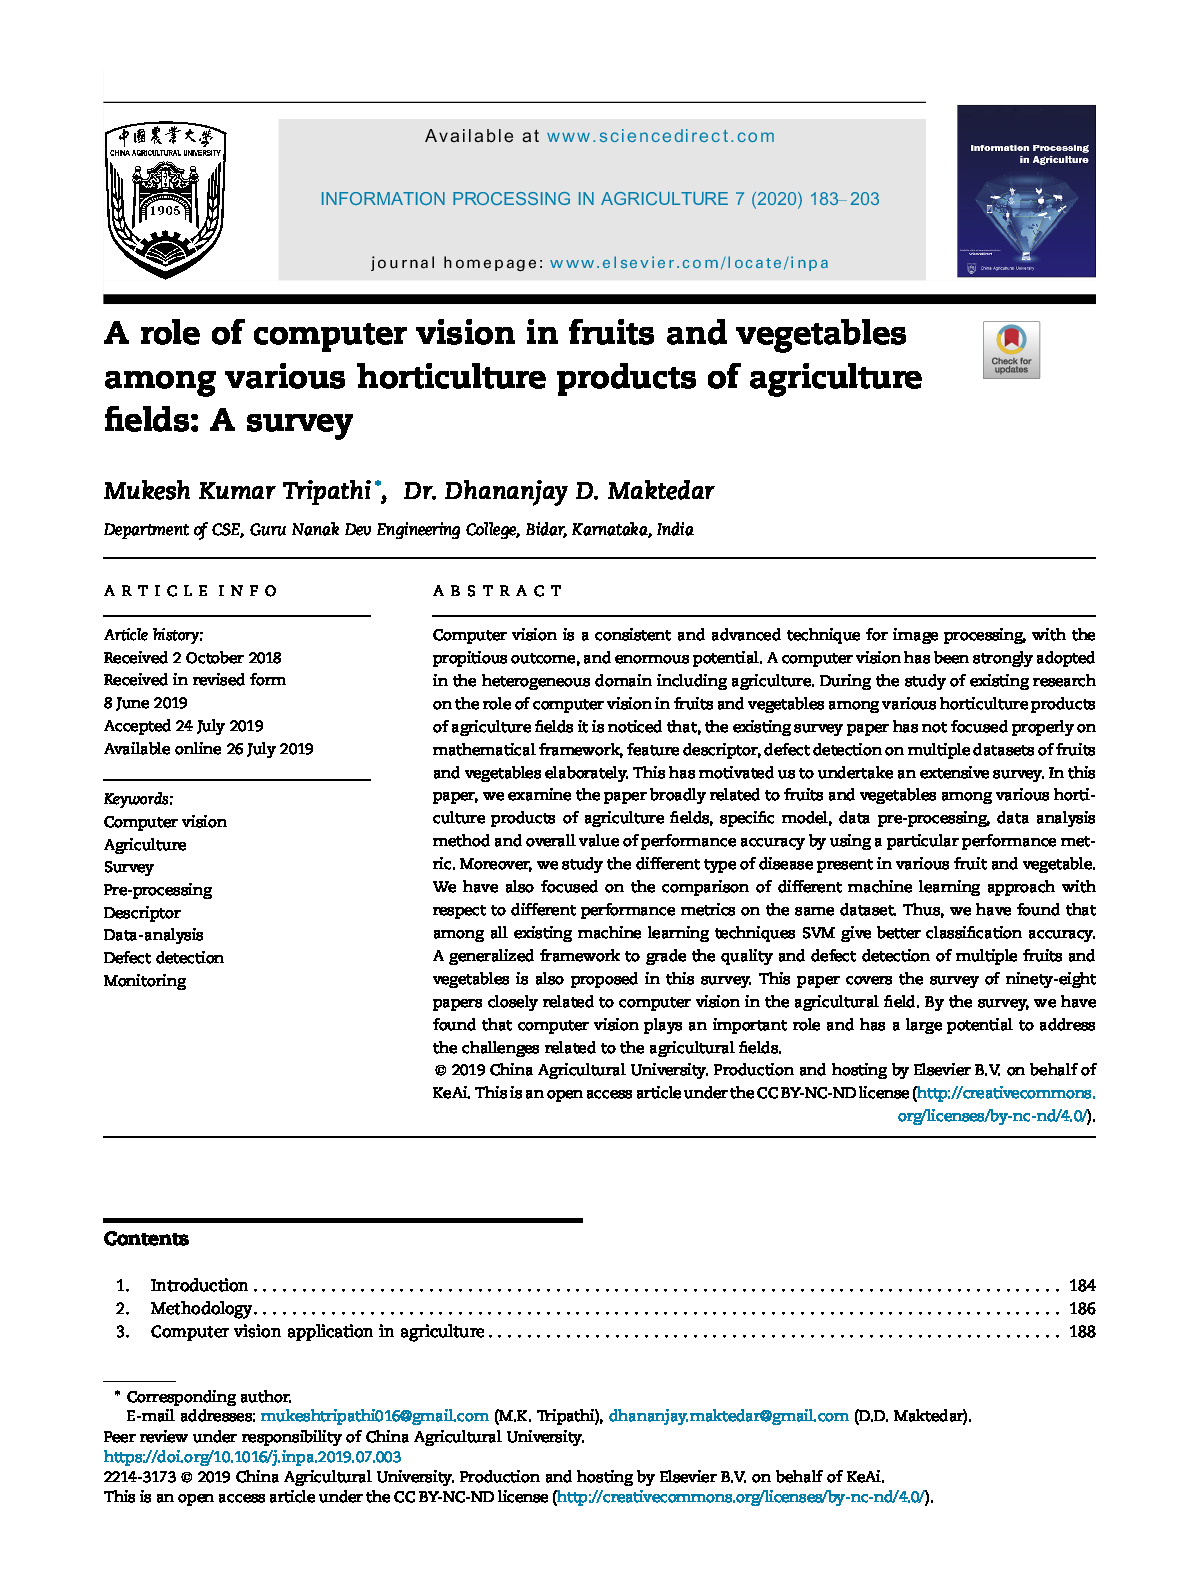 A role of computer vision in fruits and vegetables